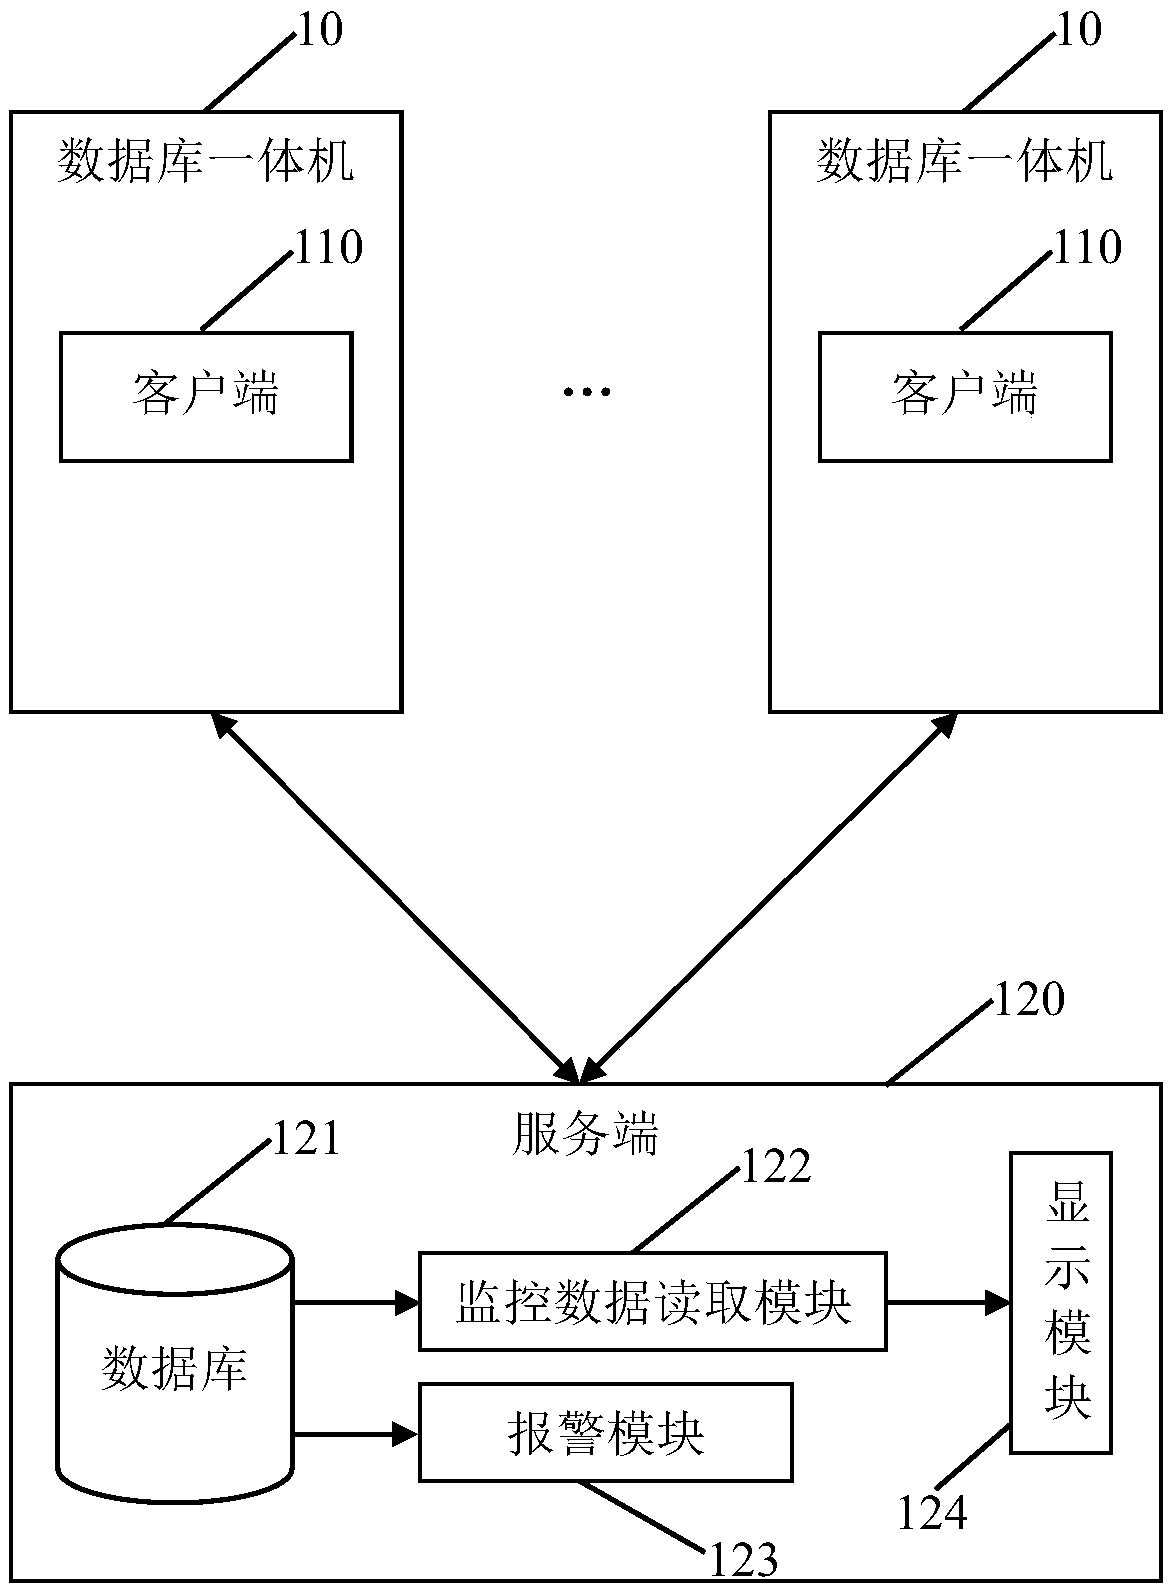 Monitoring system and a method of a database integrated machine